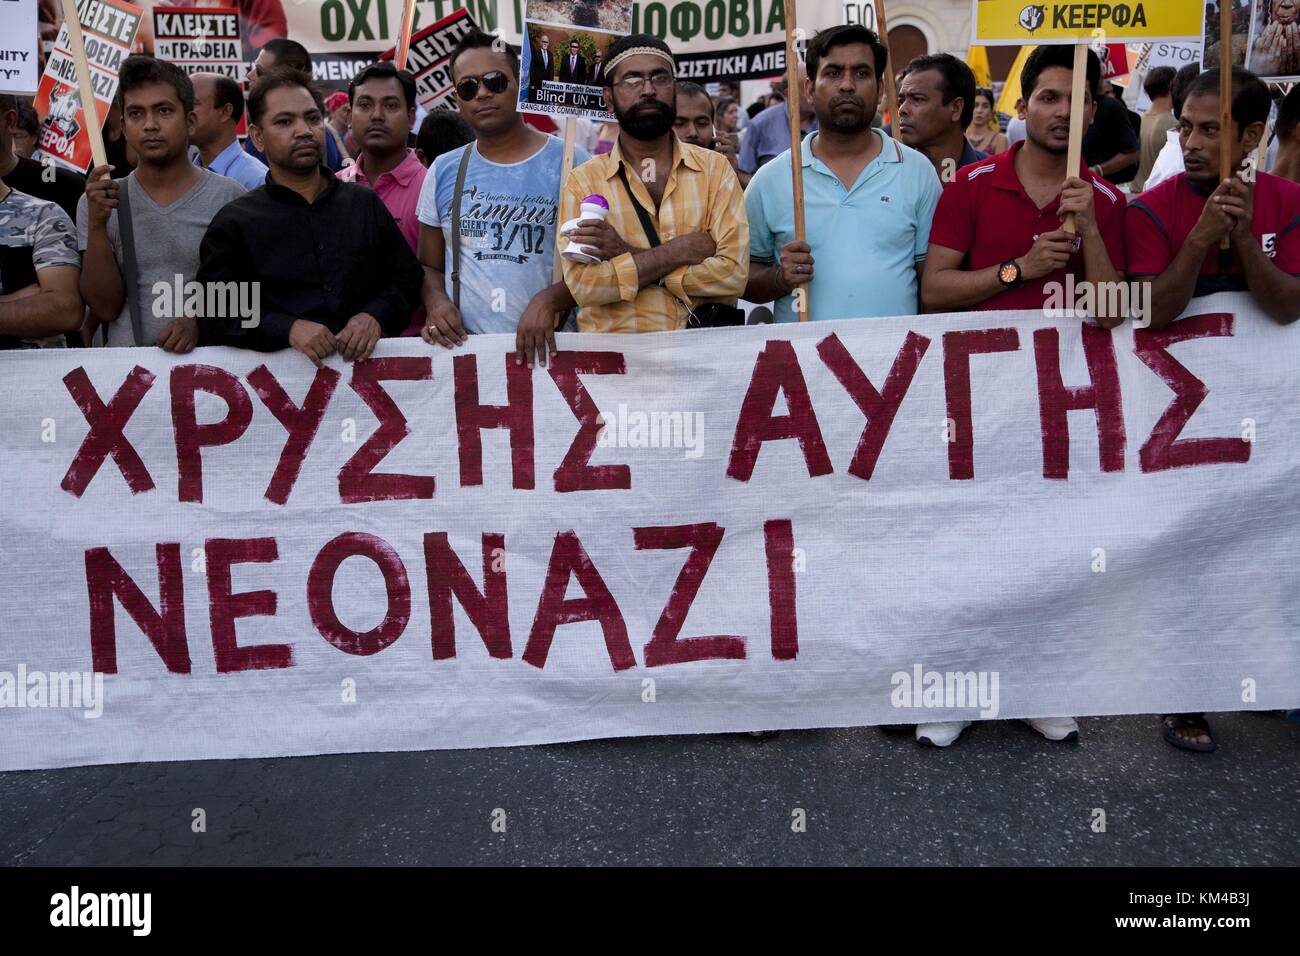 Members of Pacistan Community of Greece, during rally against Greek far-right party Chrysi Avgi (Golden Dawn). 16.09.2017 | usage worldwide Stock Photo